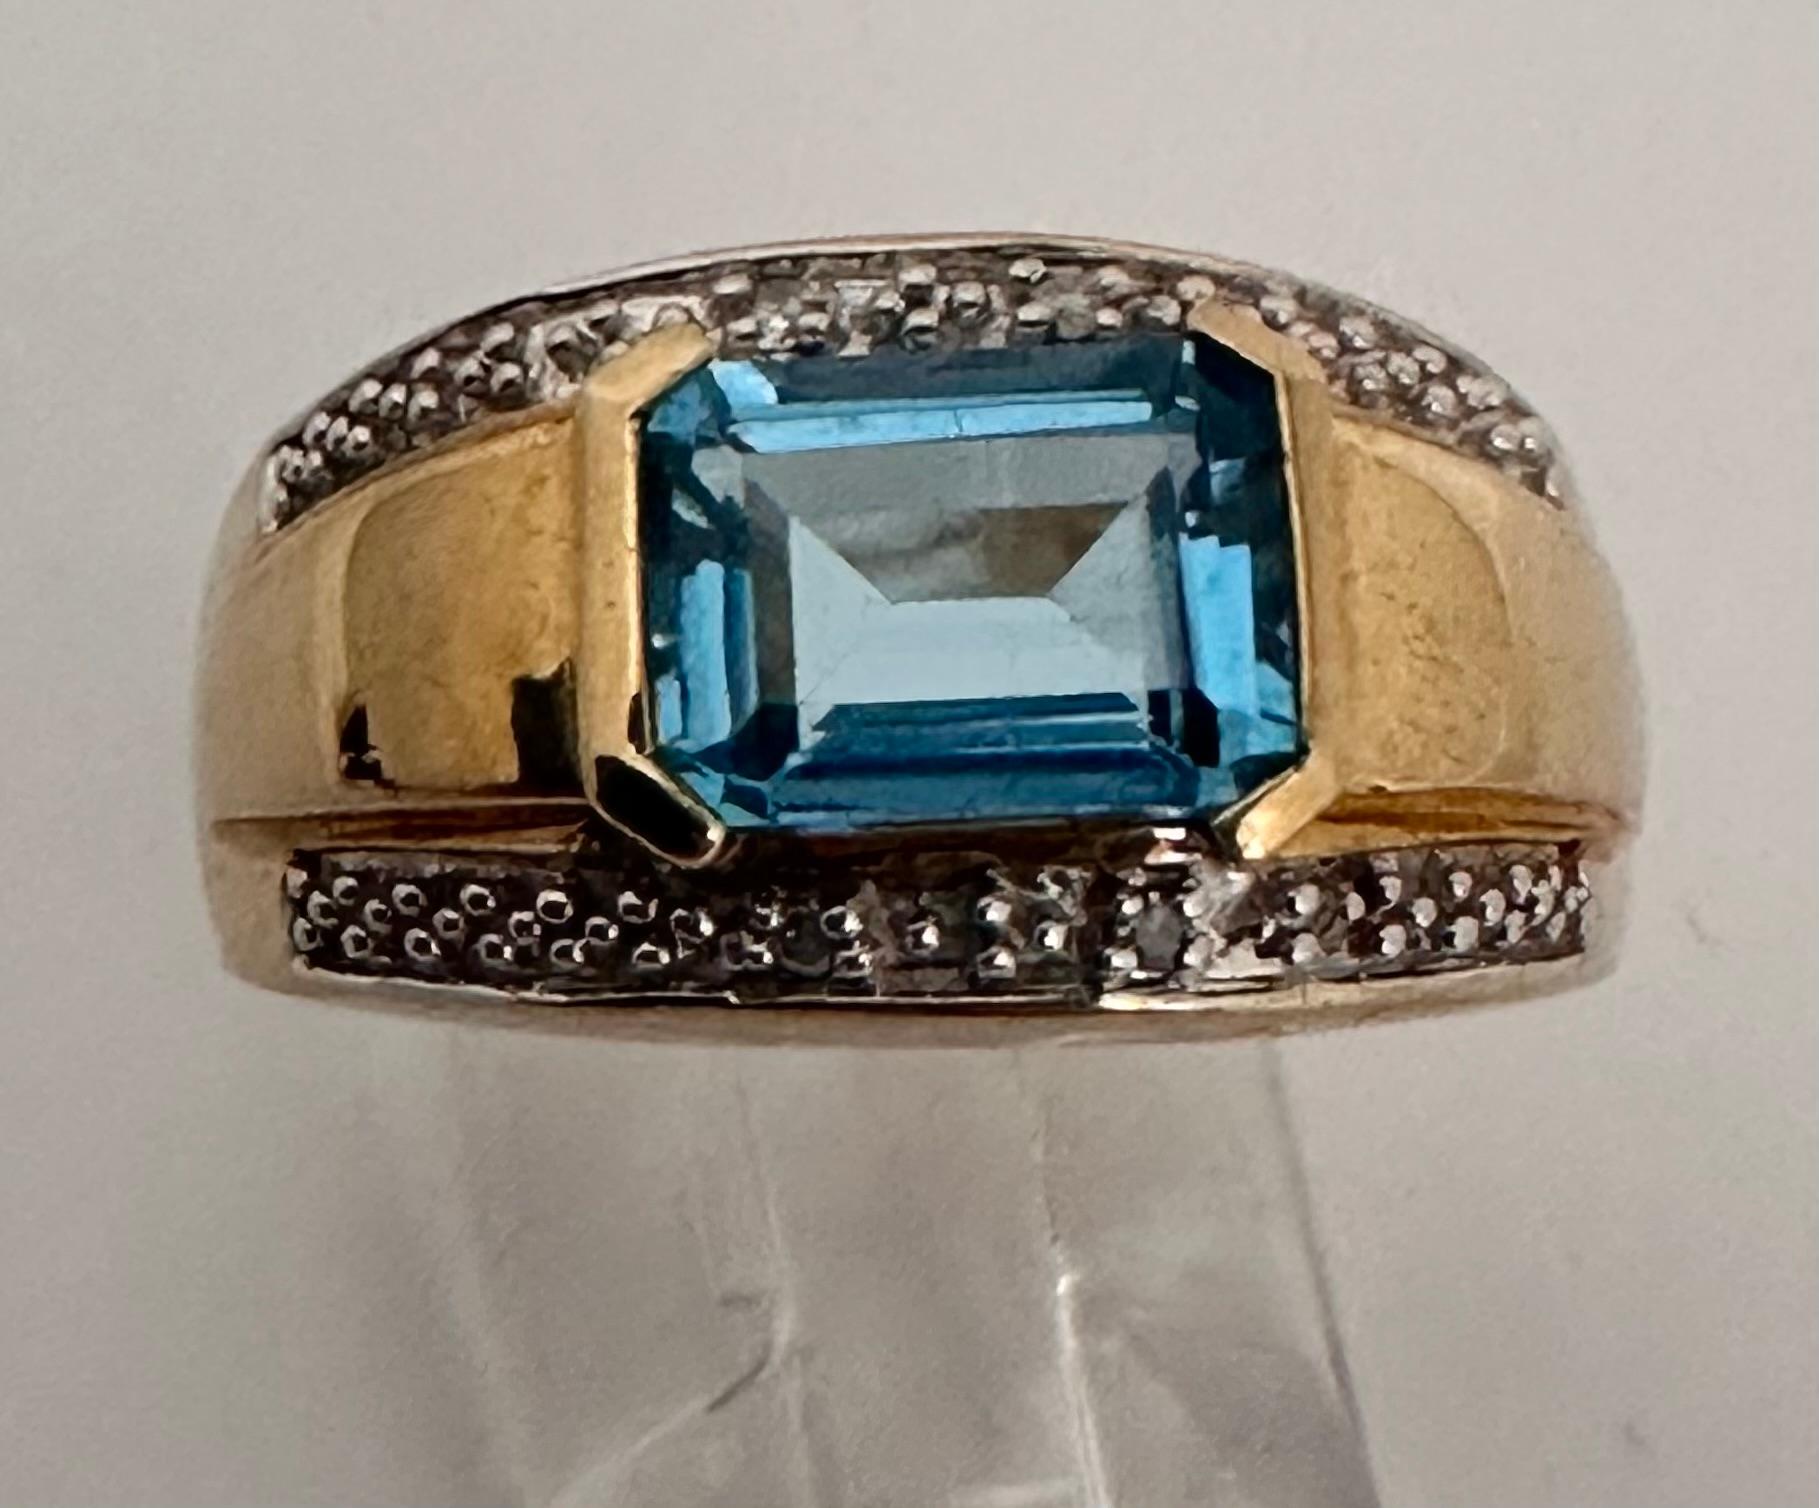 10k Yellow Gold 6mm x 8mm Emerald Cut Blue Topaz Diamond Ring Size 7 For Sale 2